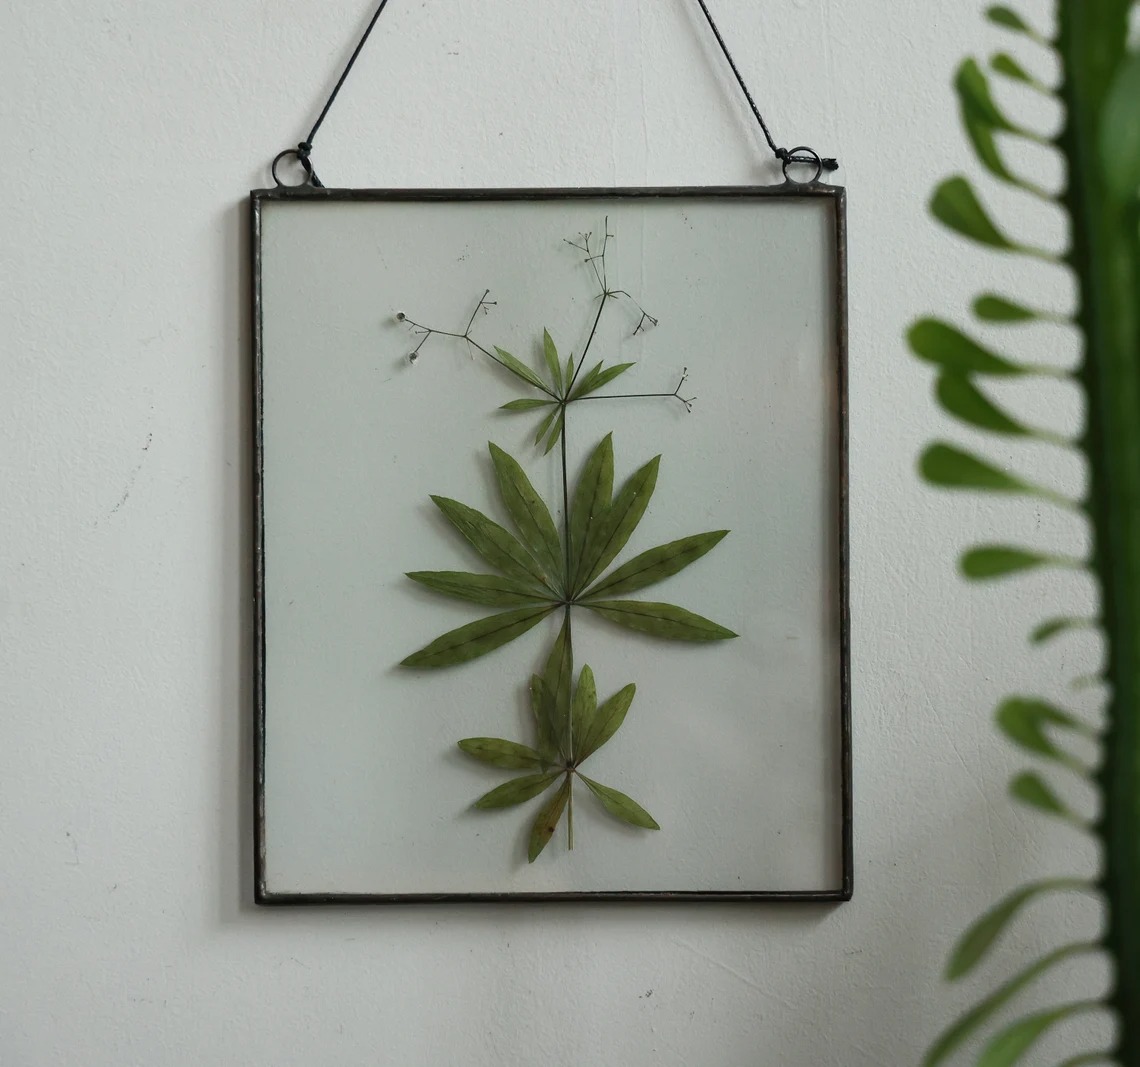 Gorgeous Herbarium In Glass And Resin Sea Frames By Anna Paschenko (10)